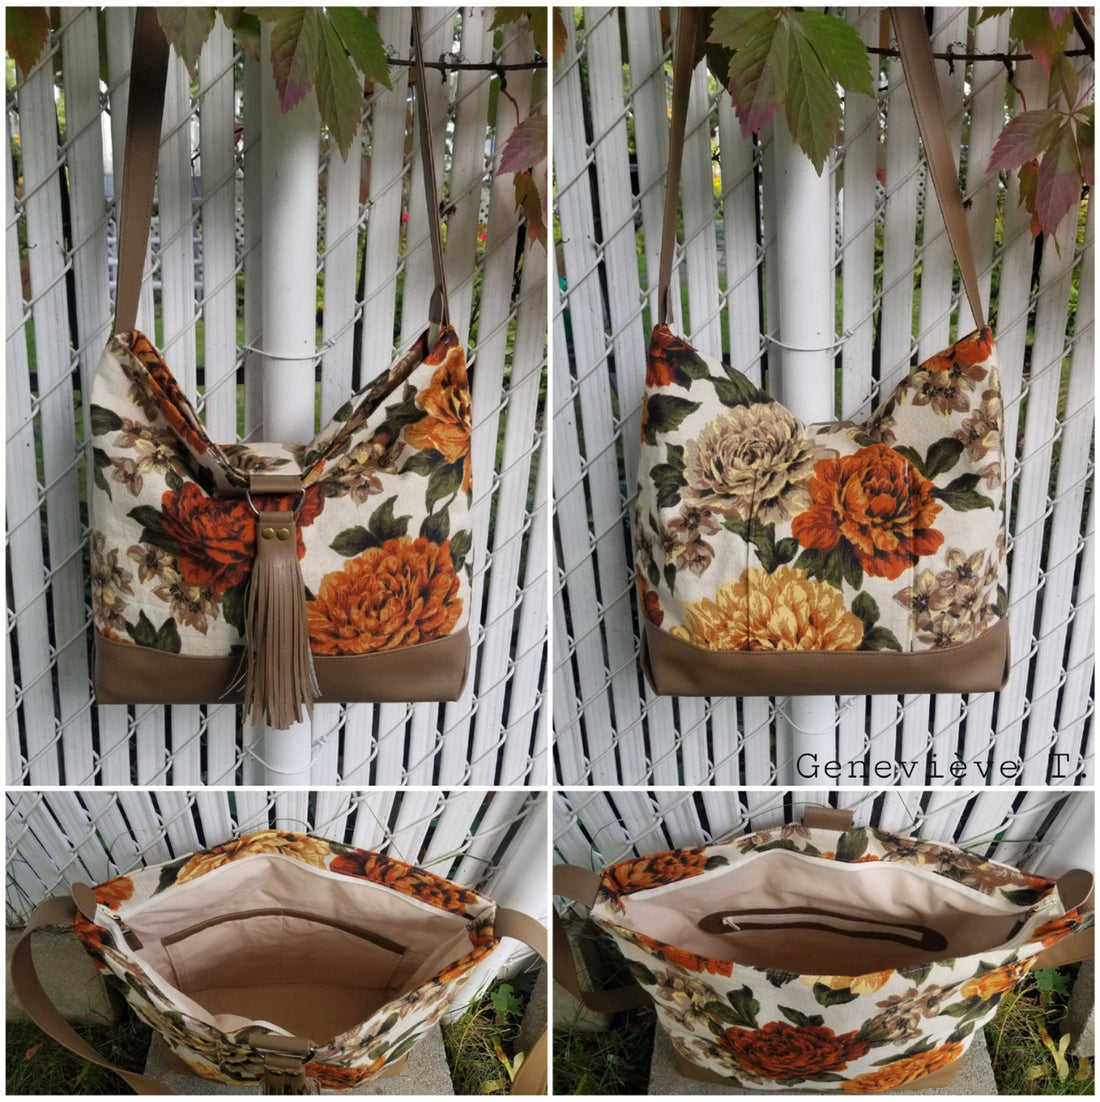 Krystal Convertible Bag PDF sewing pattern (includes SVGs and video!)